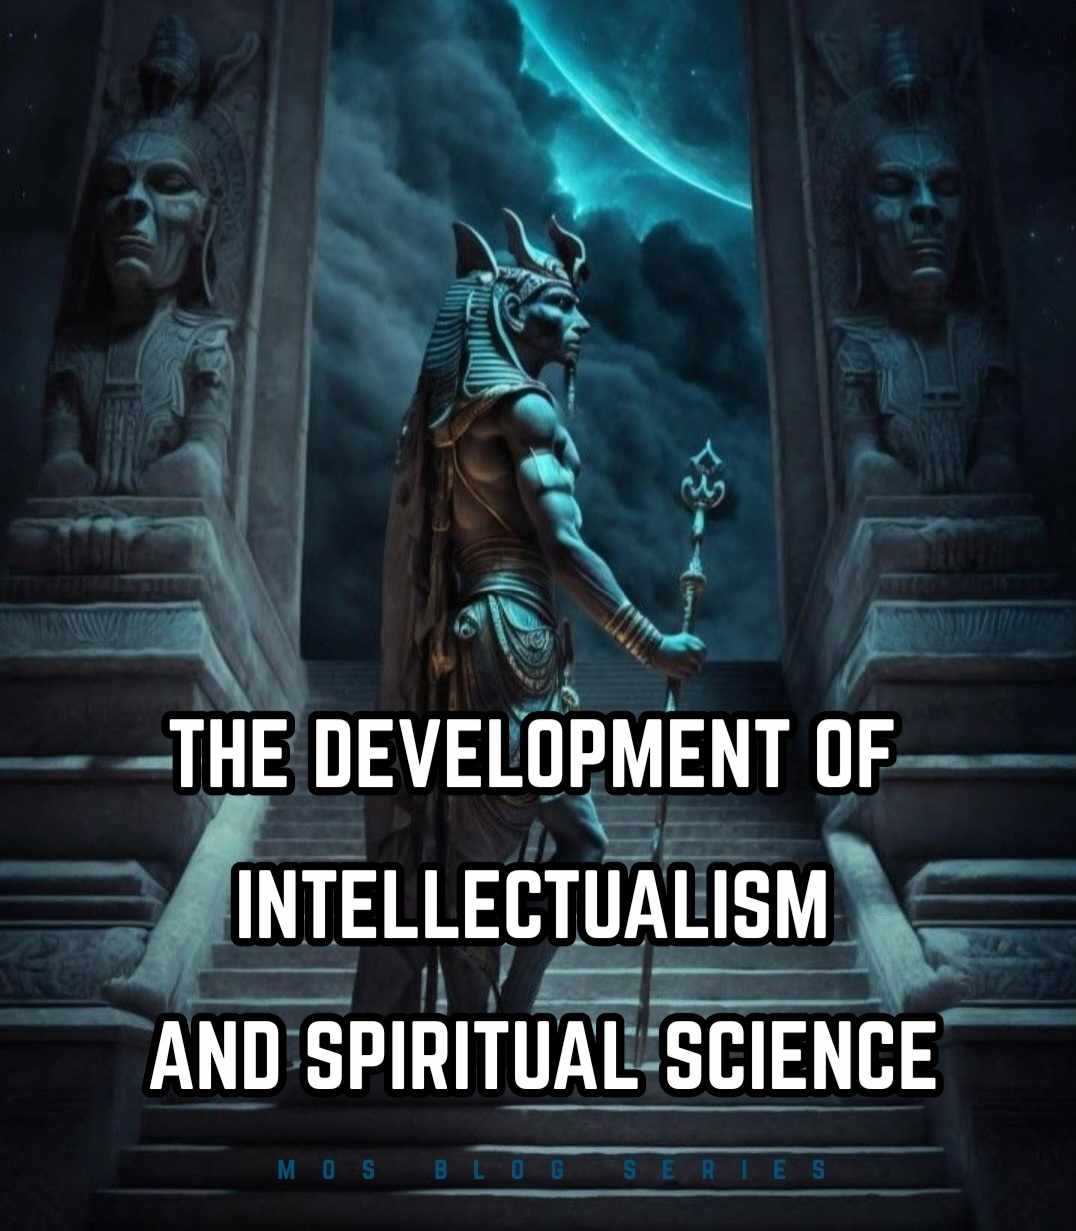 The Development and Evolution of Intellectualism and Spiritual Science